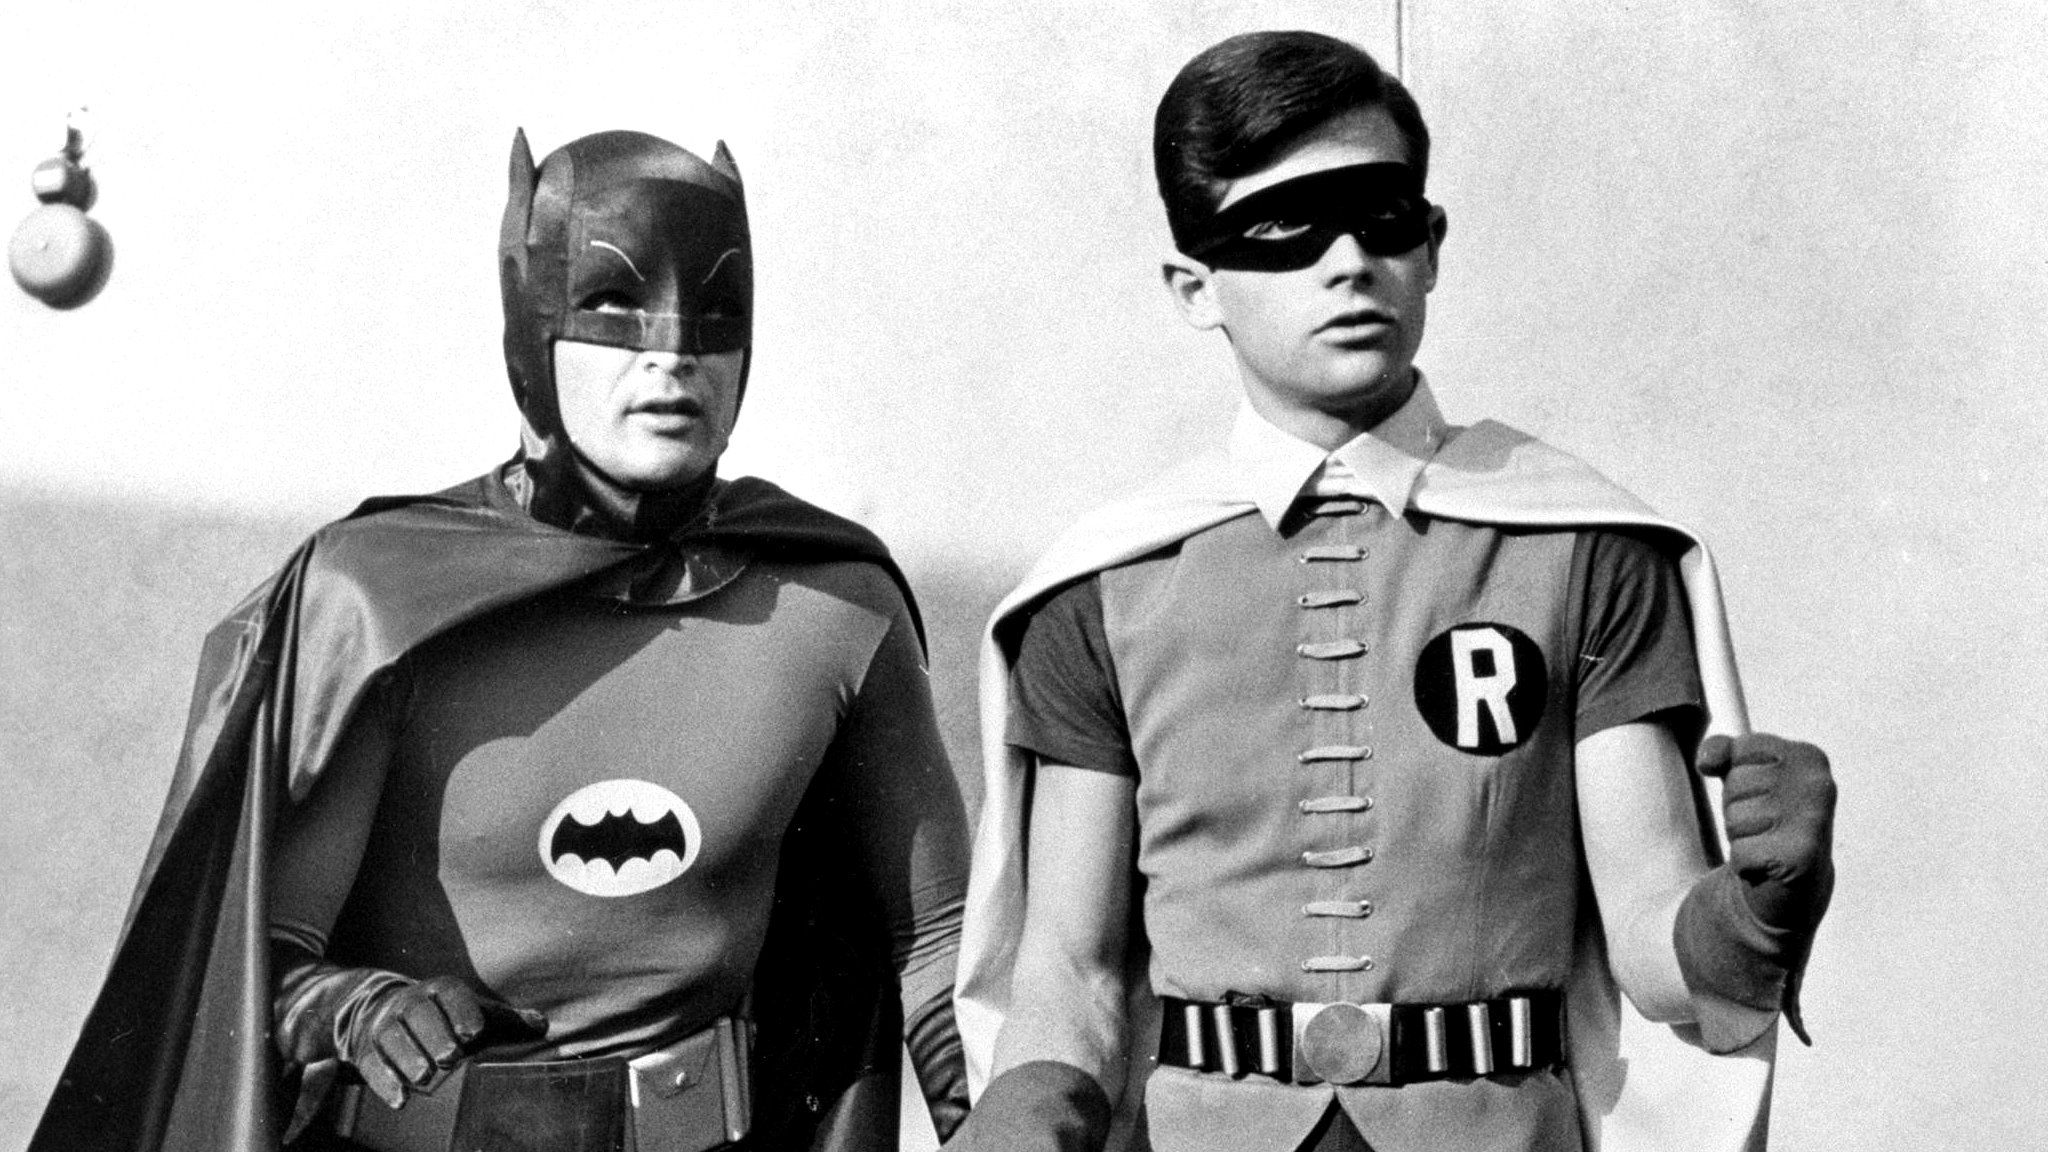 File photo of actor Adam West as Batman (left) and Burt Ward as Robin. dated 15 Feb 1966